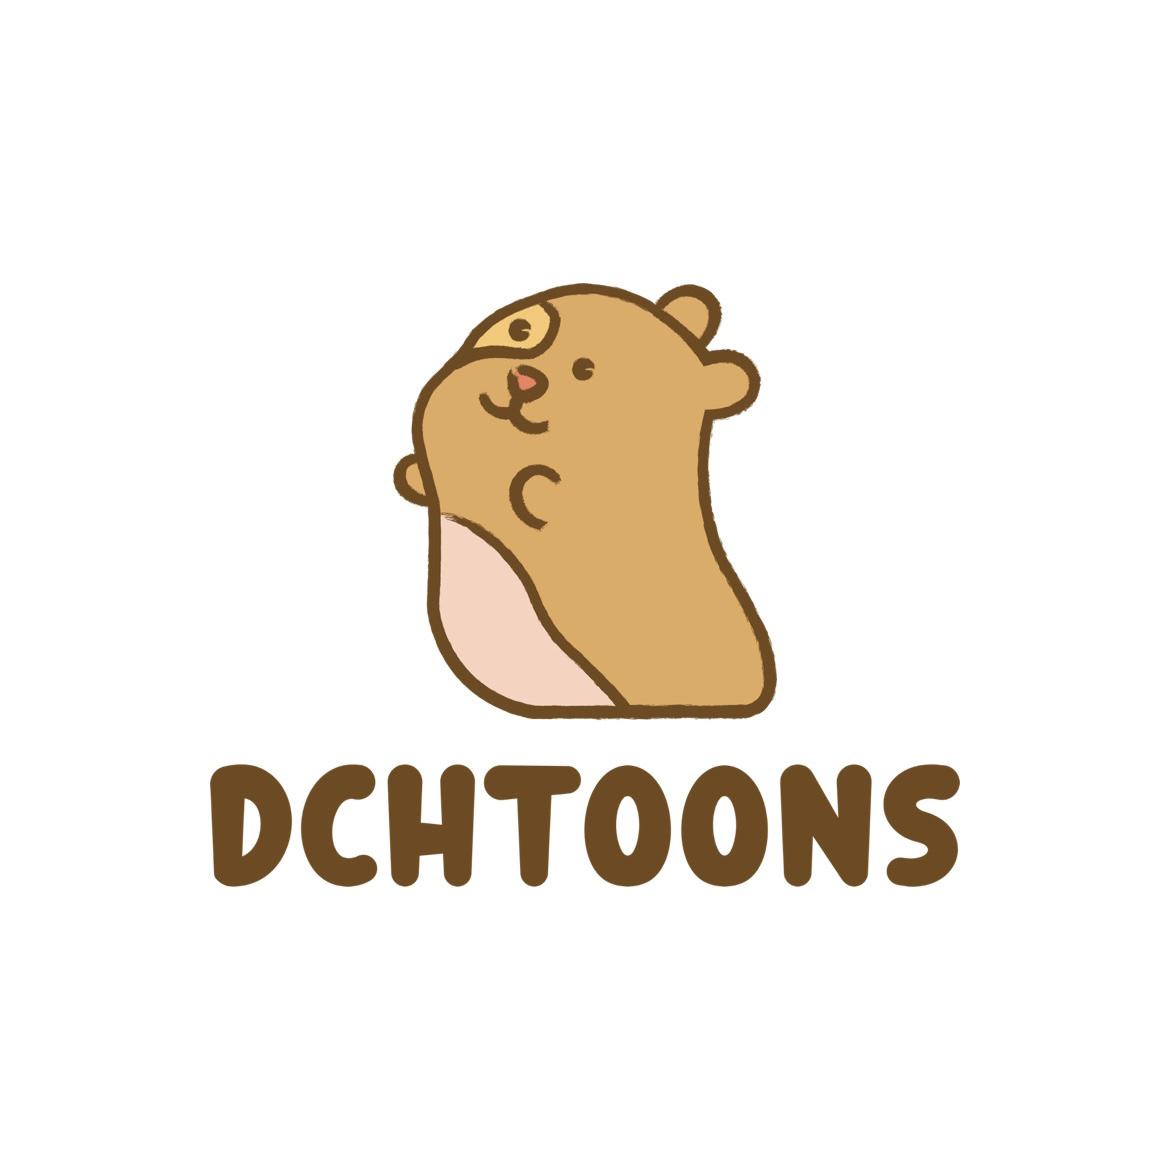 dchtoons 🐹